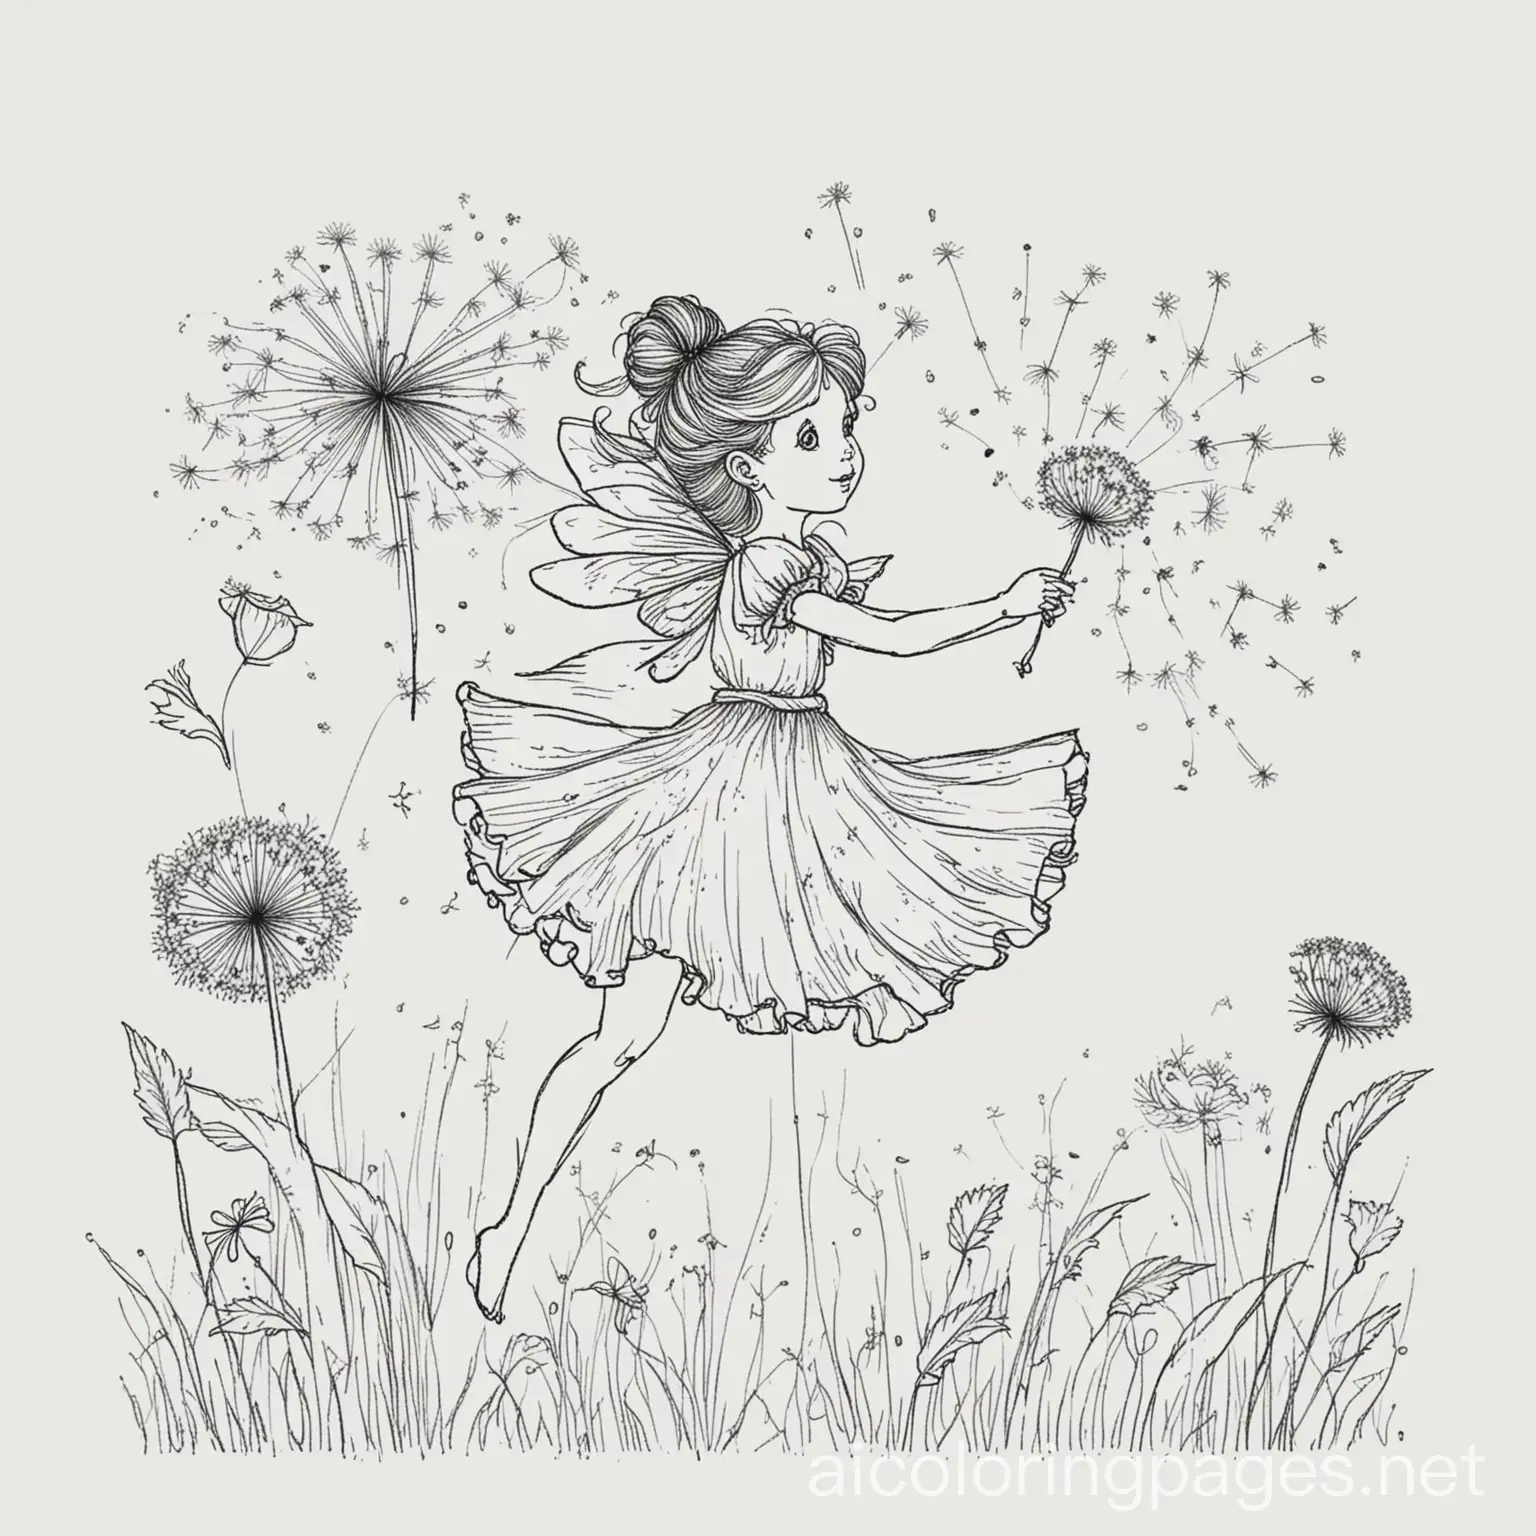 fairy dancing with a dandelion in the wind, Coloring Page, black and white, line art, white background, Simplicity, Ample White Space. The background of the coloring page is plain white to make it easy for young children to color within the lines. The outlines of all the subjects are easy to distinguish, making it simple for kids to color without too much difficulty